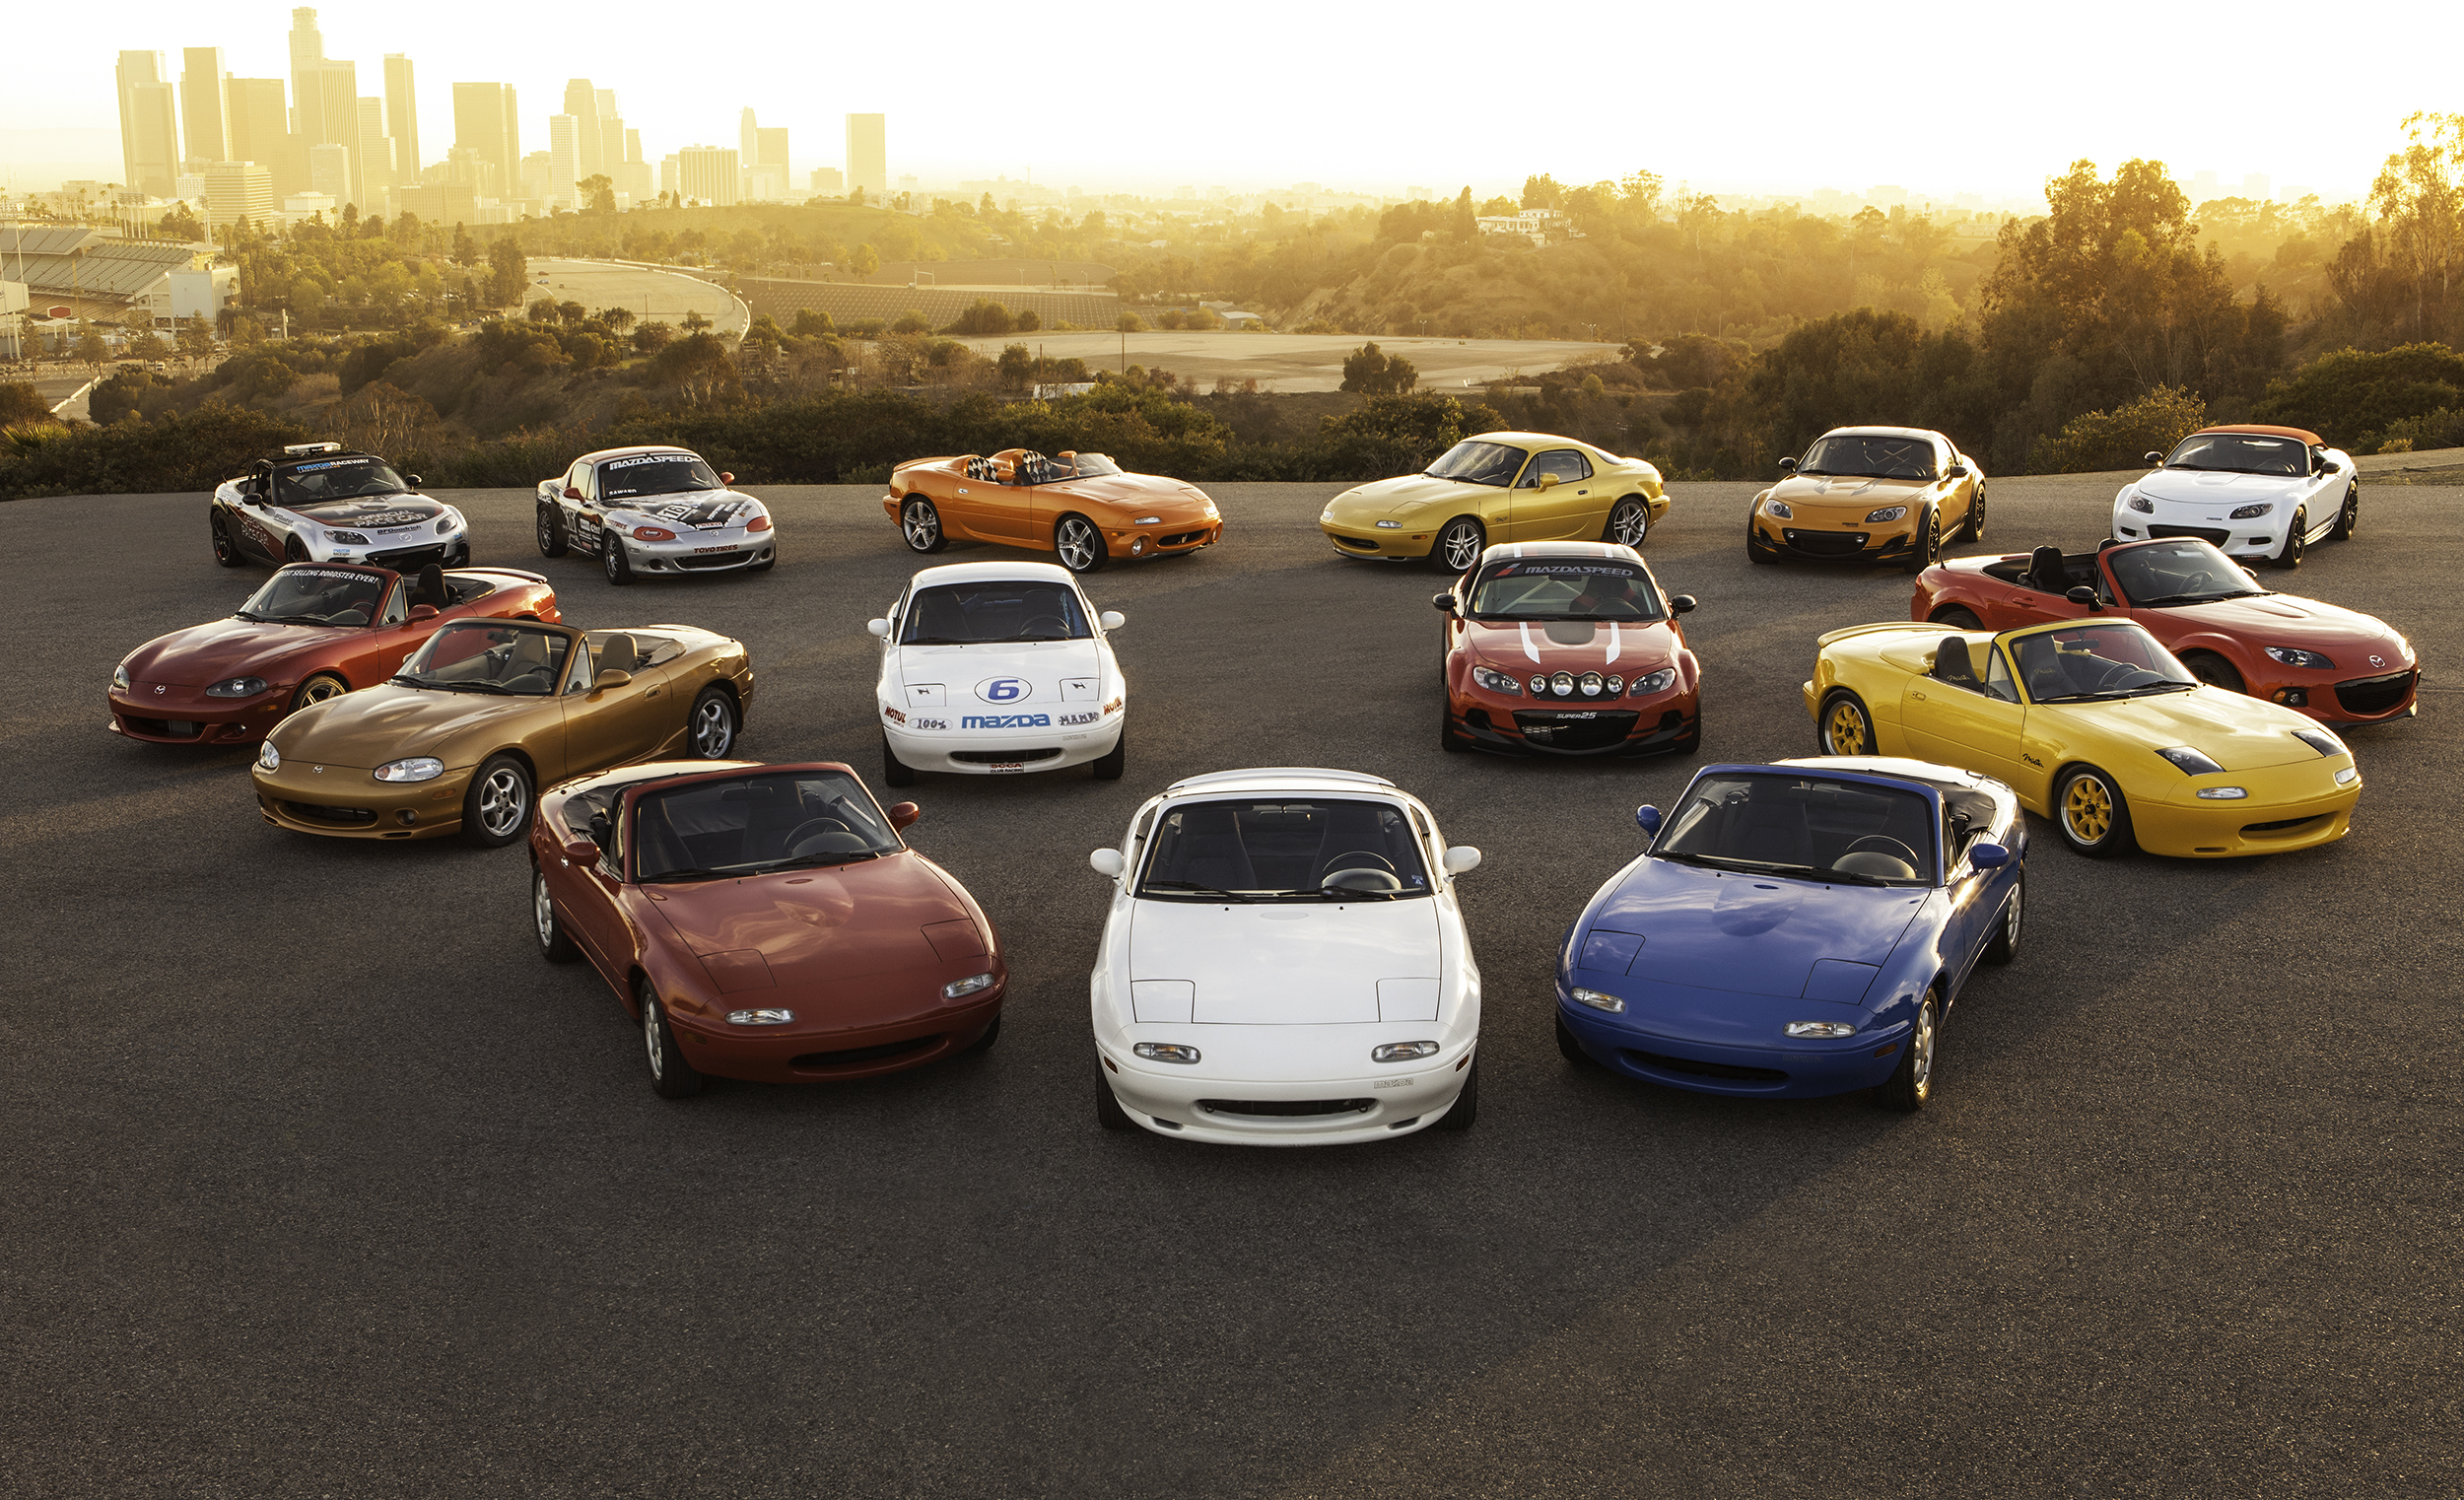  Mazda MX-5 Concept and Production Cars  